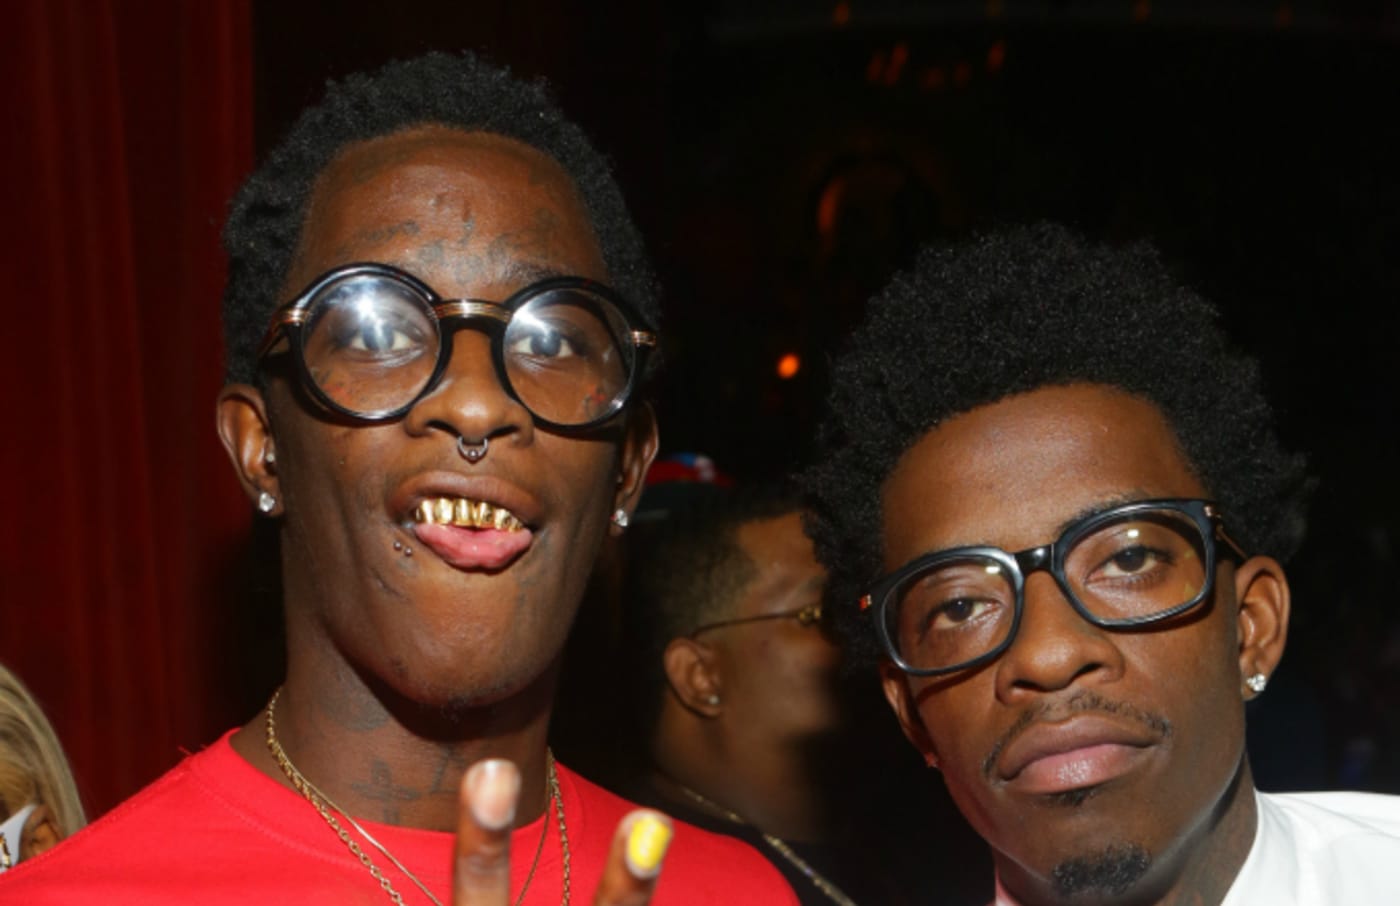 Young Thug and Rich Homie Quan attend at Opera Gardens